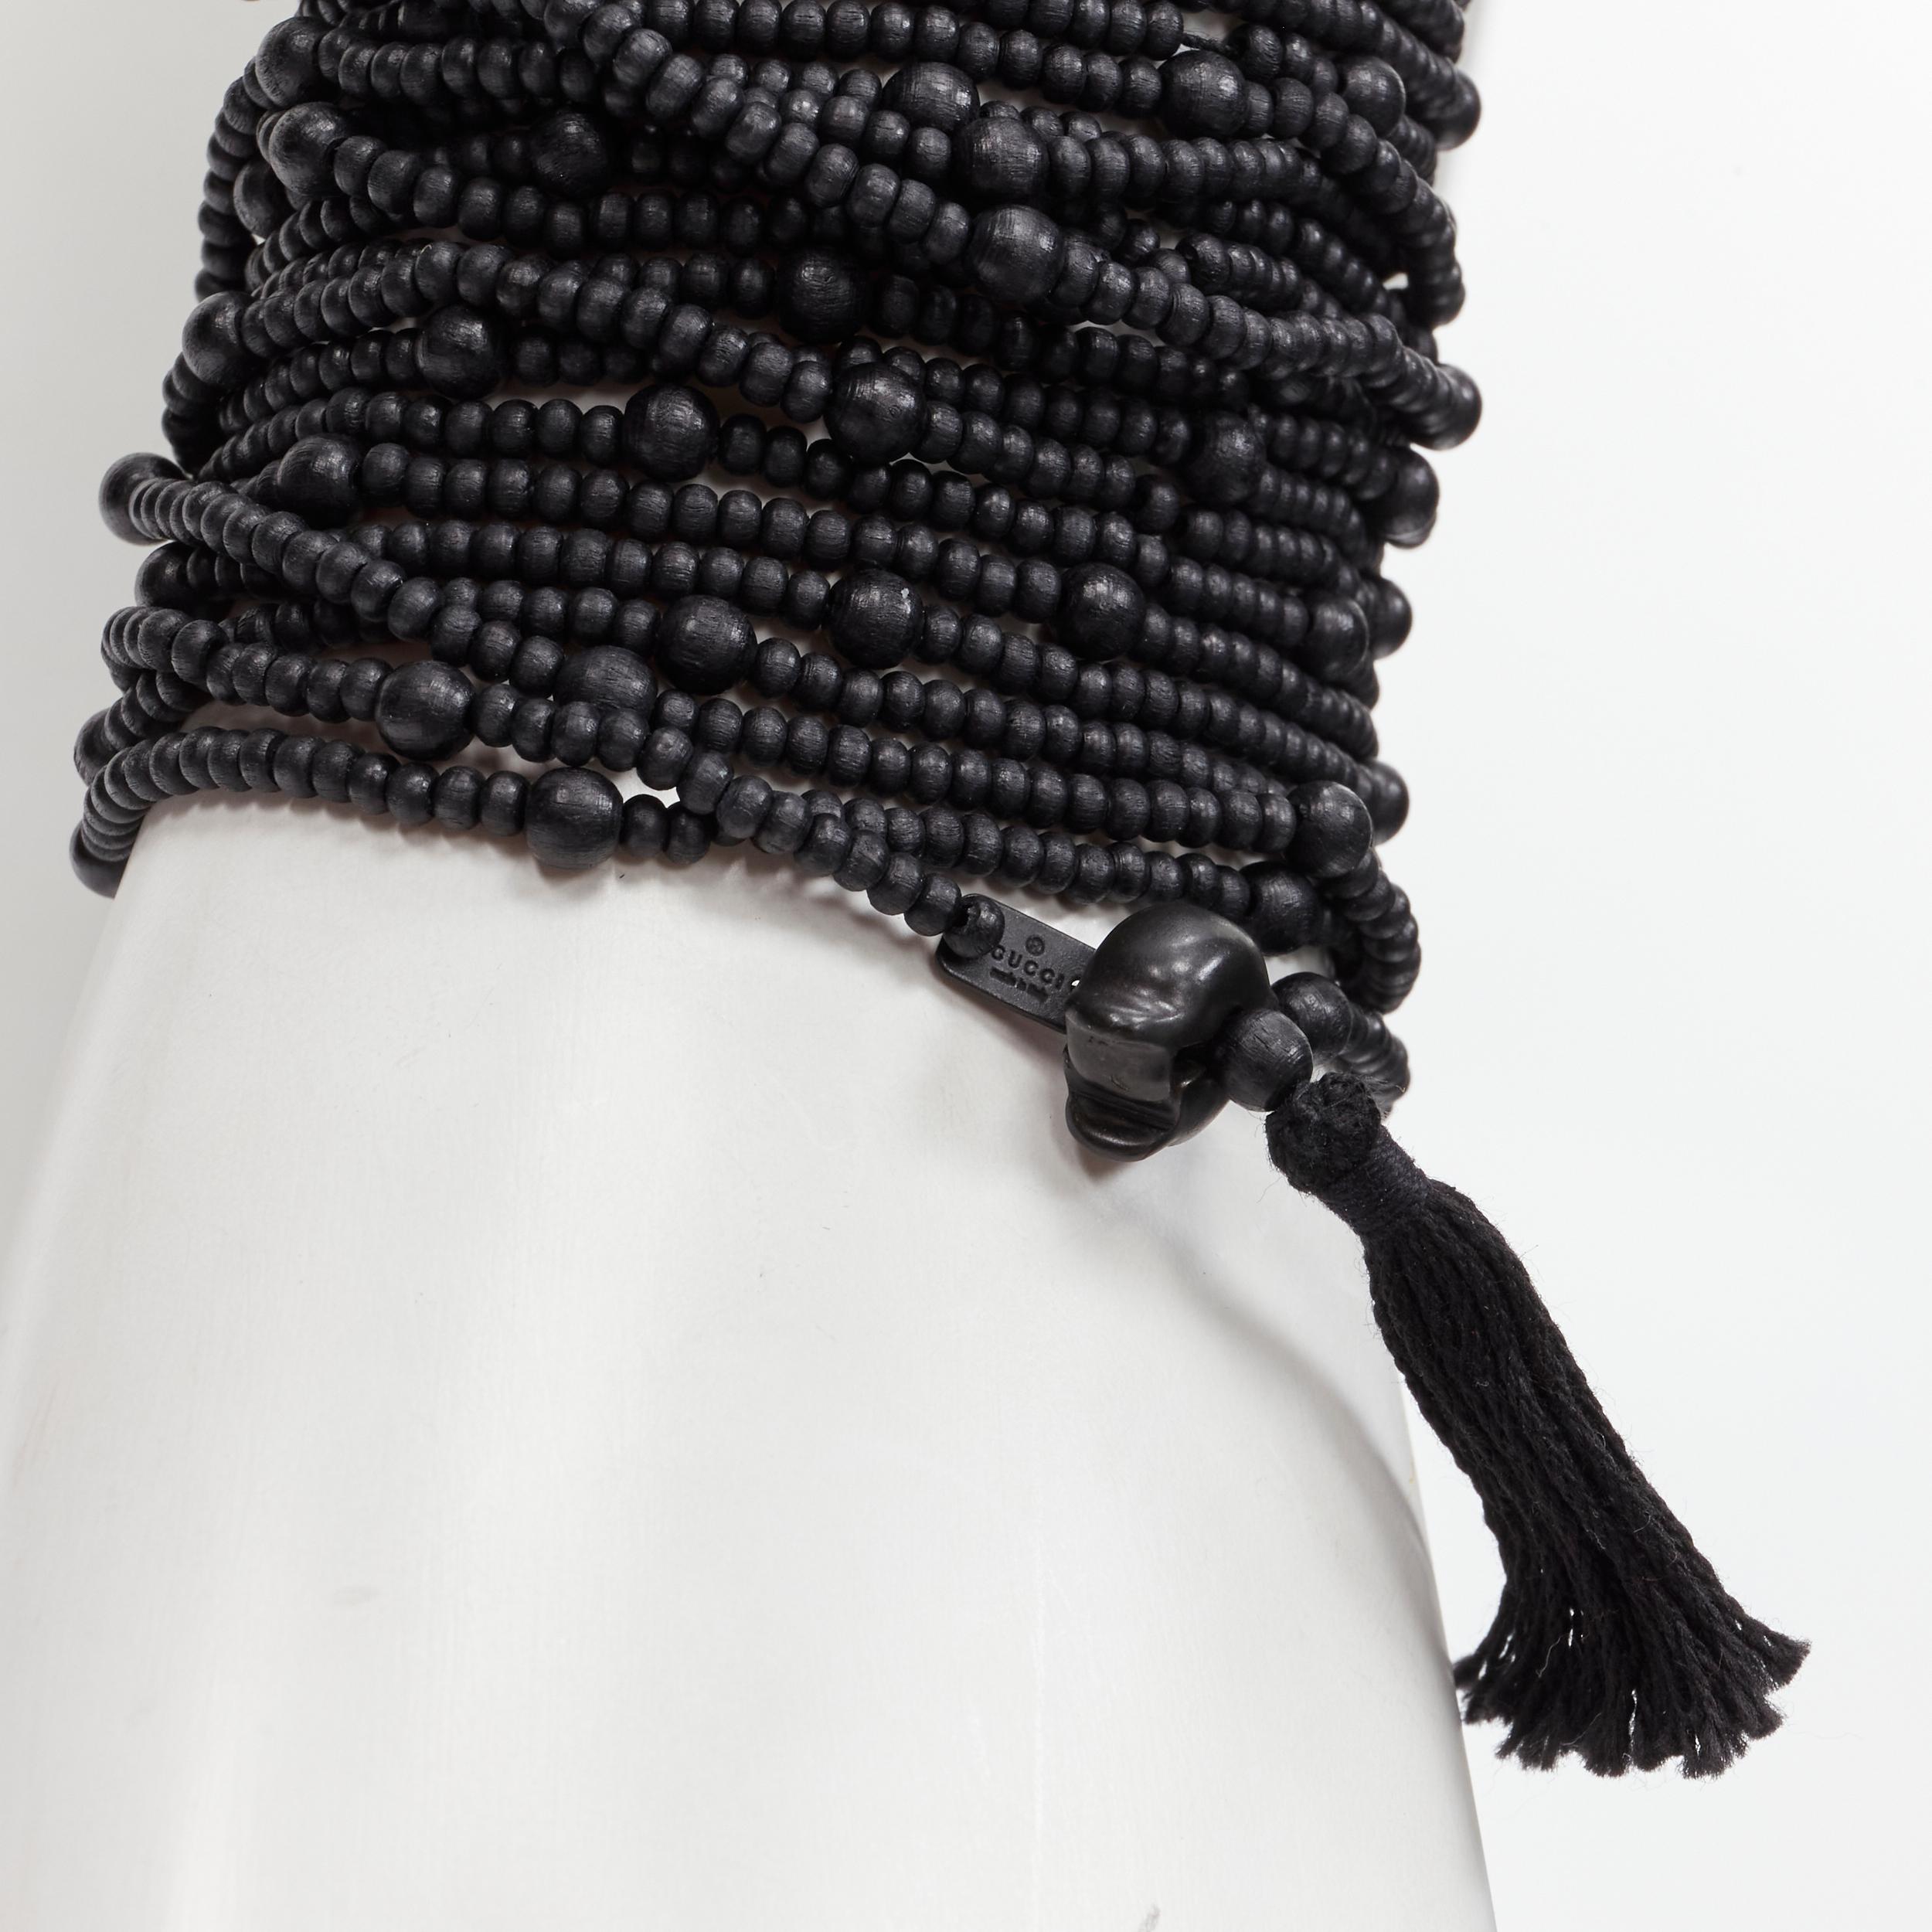 rare GUCCI Tom Ford 2002 Runway Ebony Cross black beaded fringed wrap bracelet
Reference: ANWU/A00893
Brand: Gucci
Designer: Tom Ford
Collection: 2002 - Runway
Material: Plastic
Color: Black
Pattern: Solid

CONDITION:
Condition: Excellent, this item